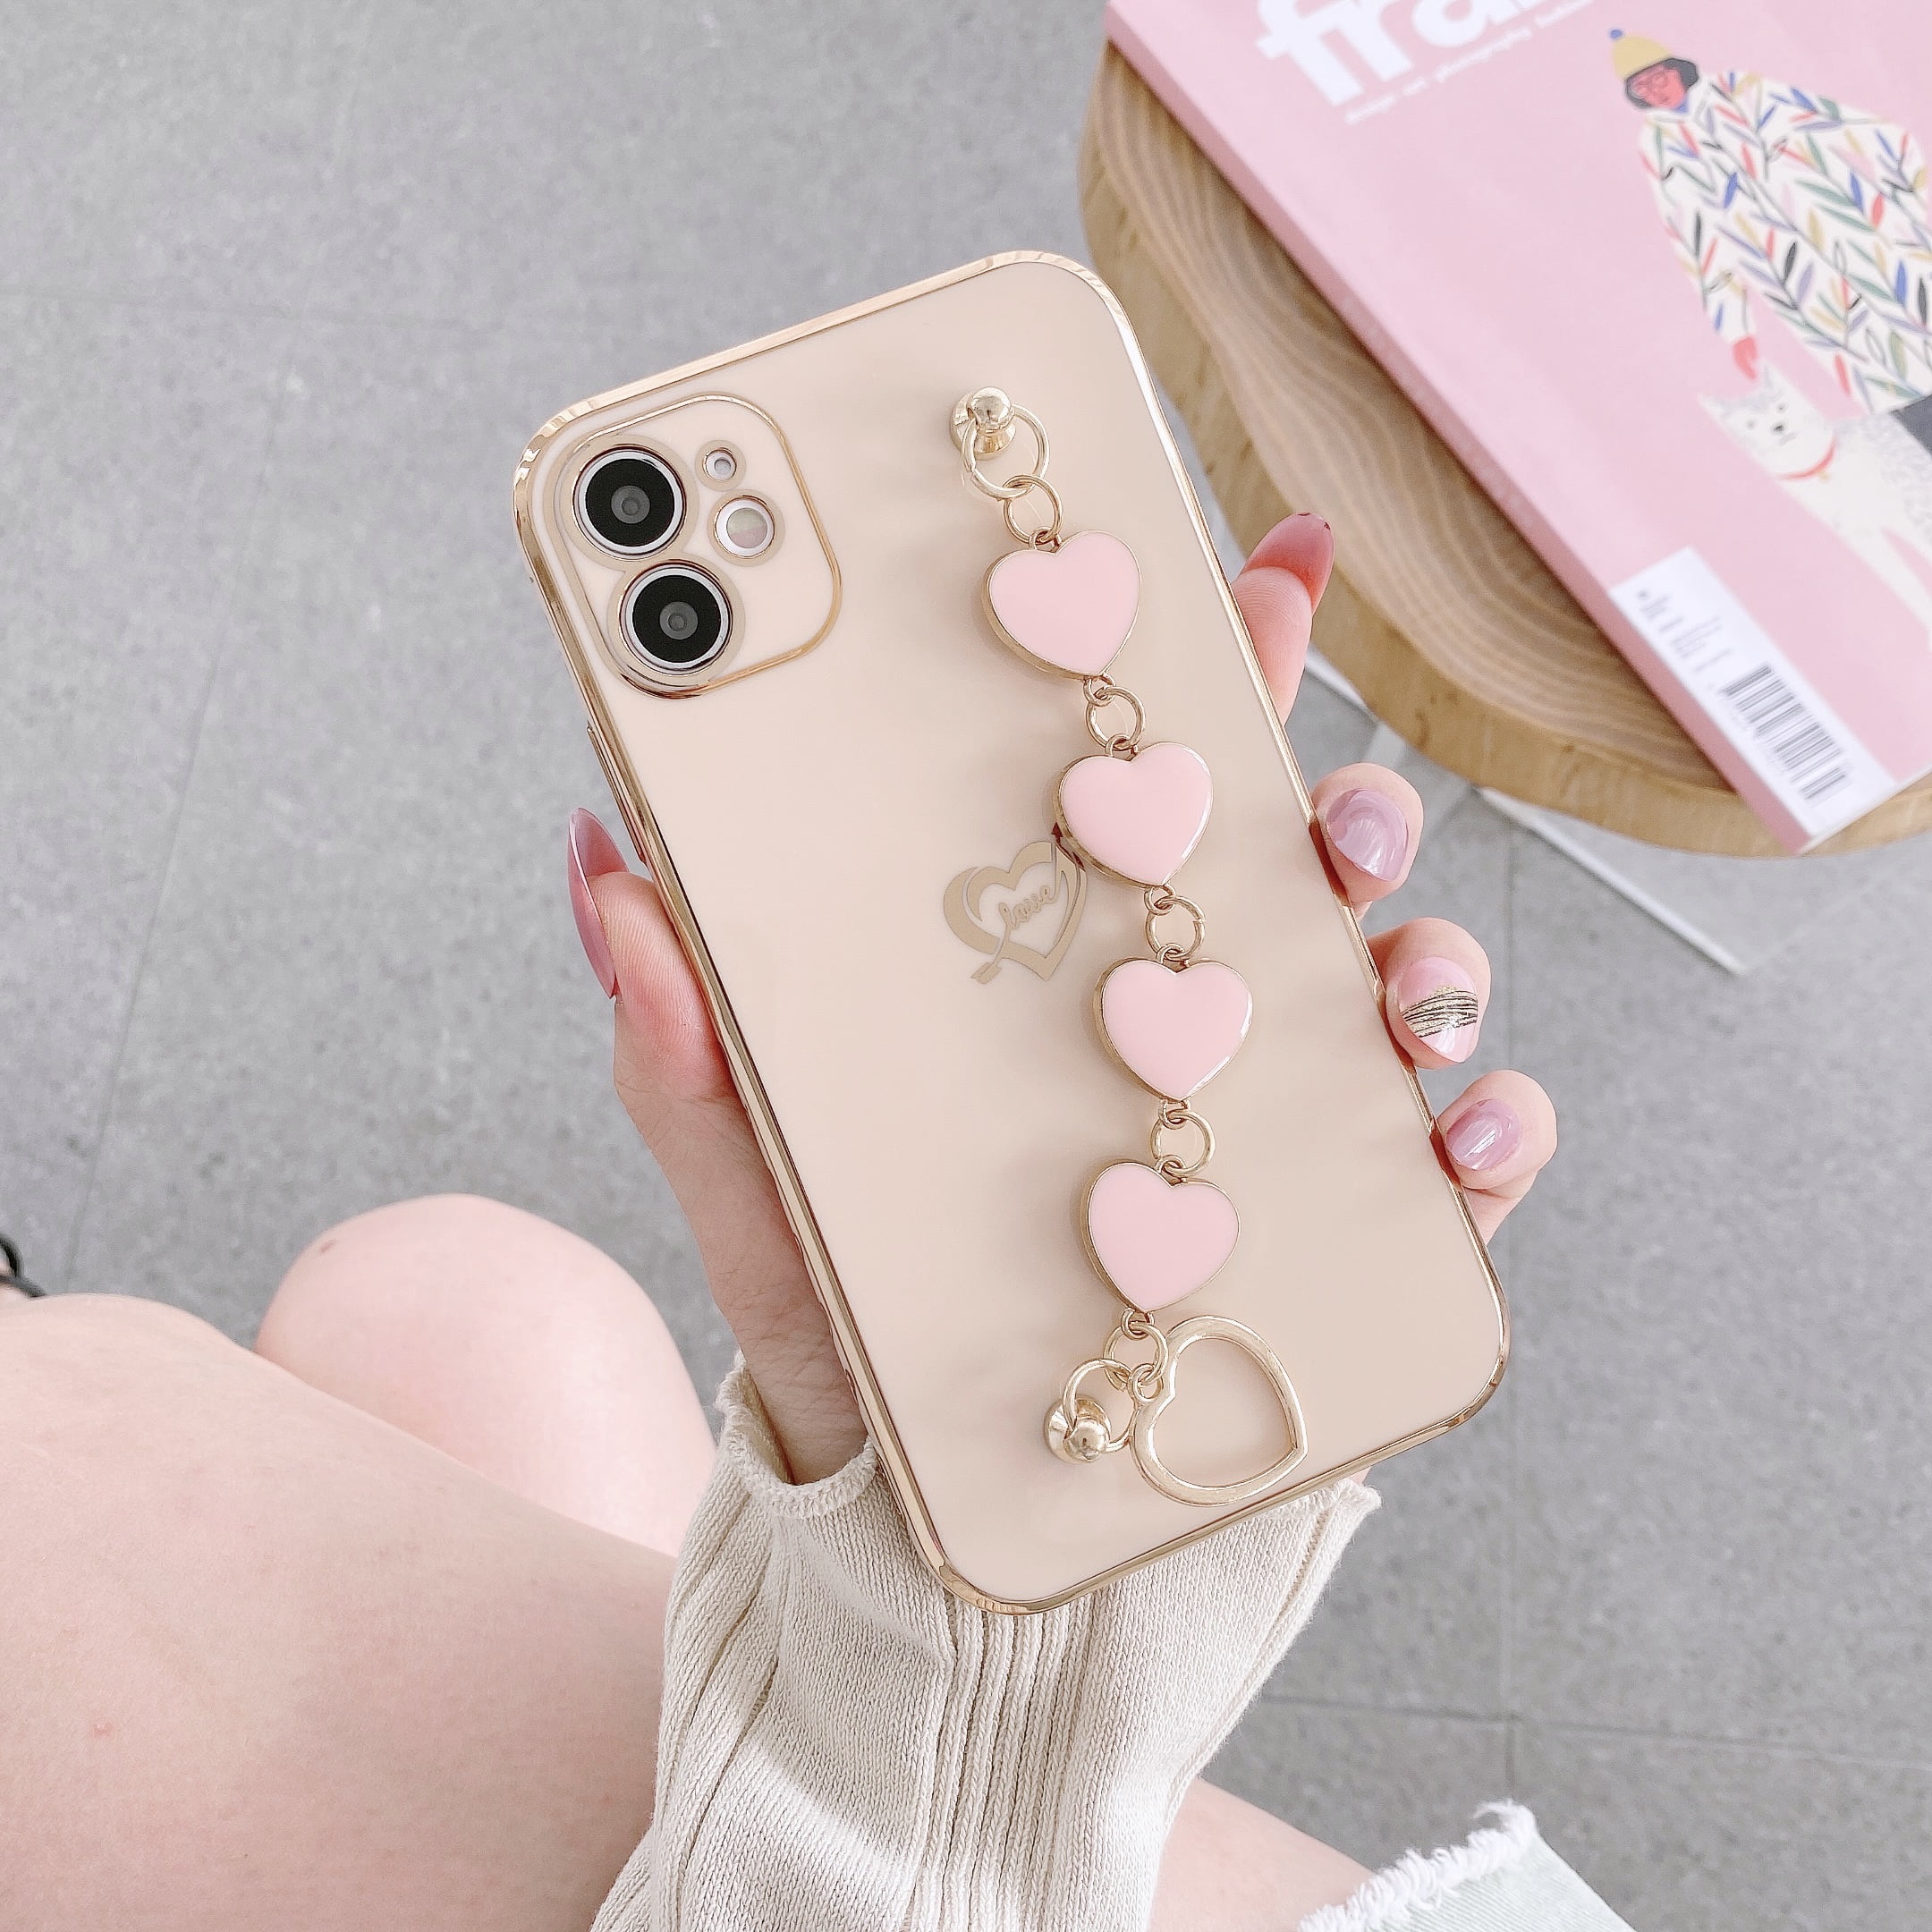 Dteck Luxury iPhone 11 Pro Max Cute Case for Women,Sparkle Plating Heart Case with Chain Strap Camera Lens Protective Girly Case for iPhone 11 Pro Max